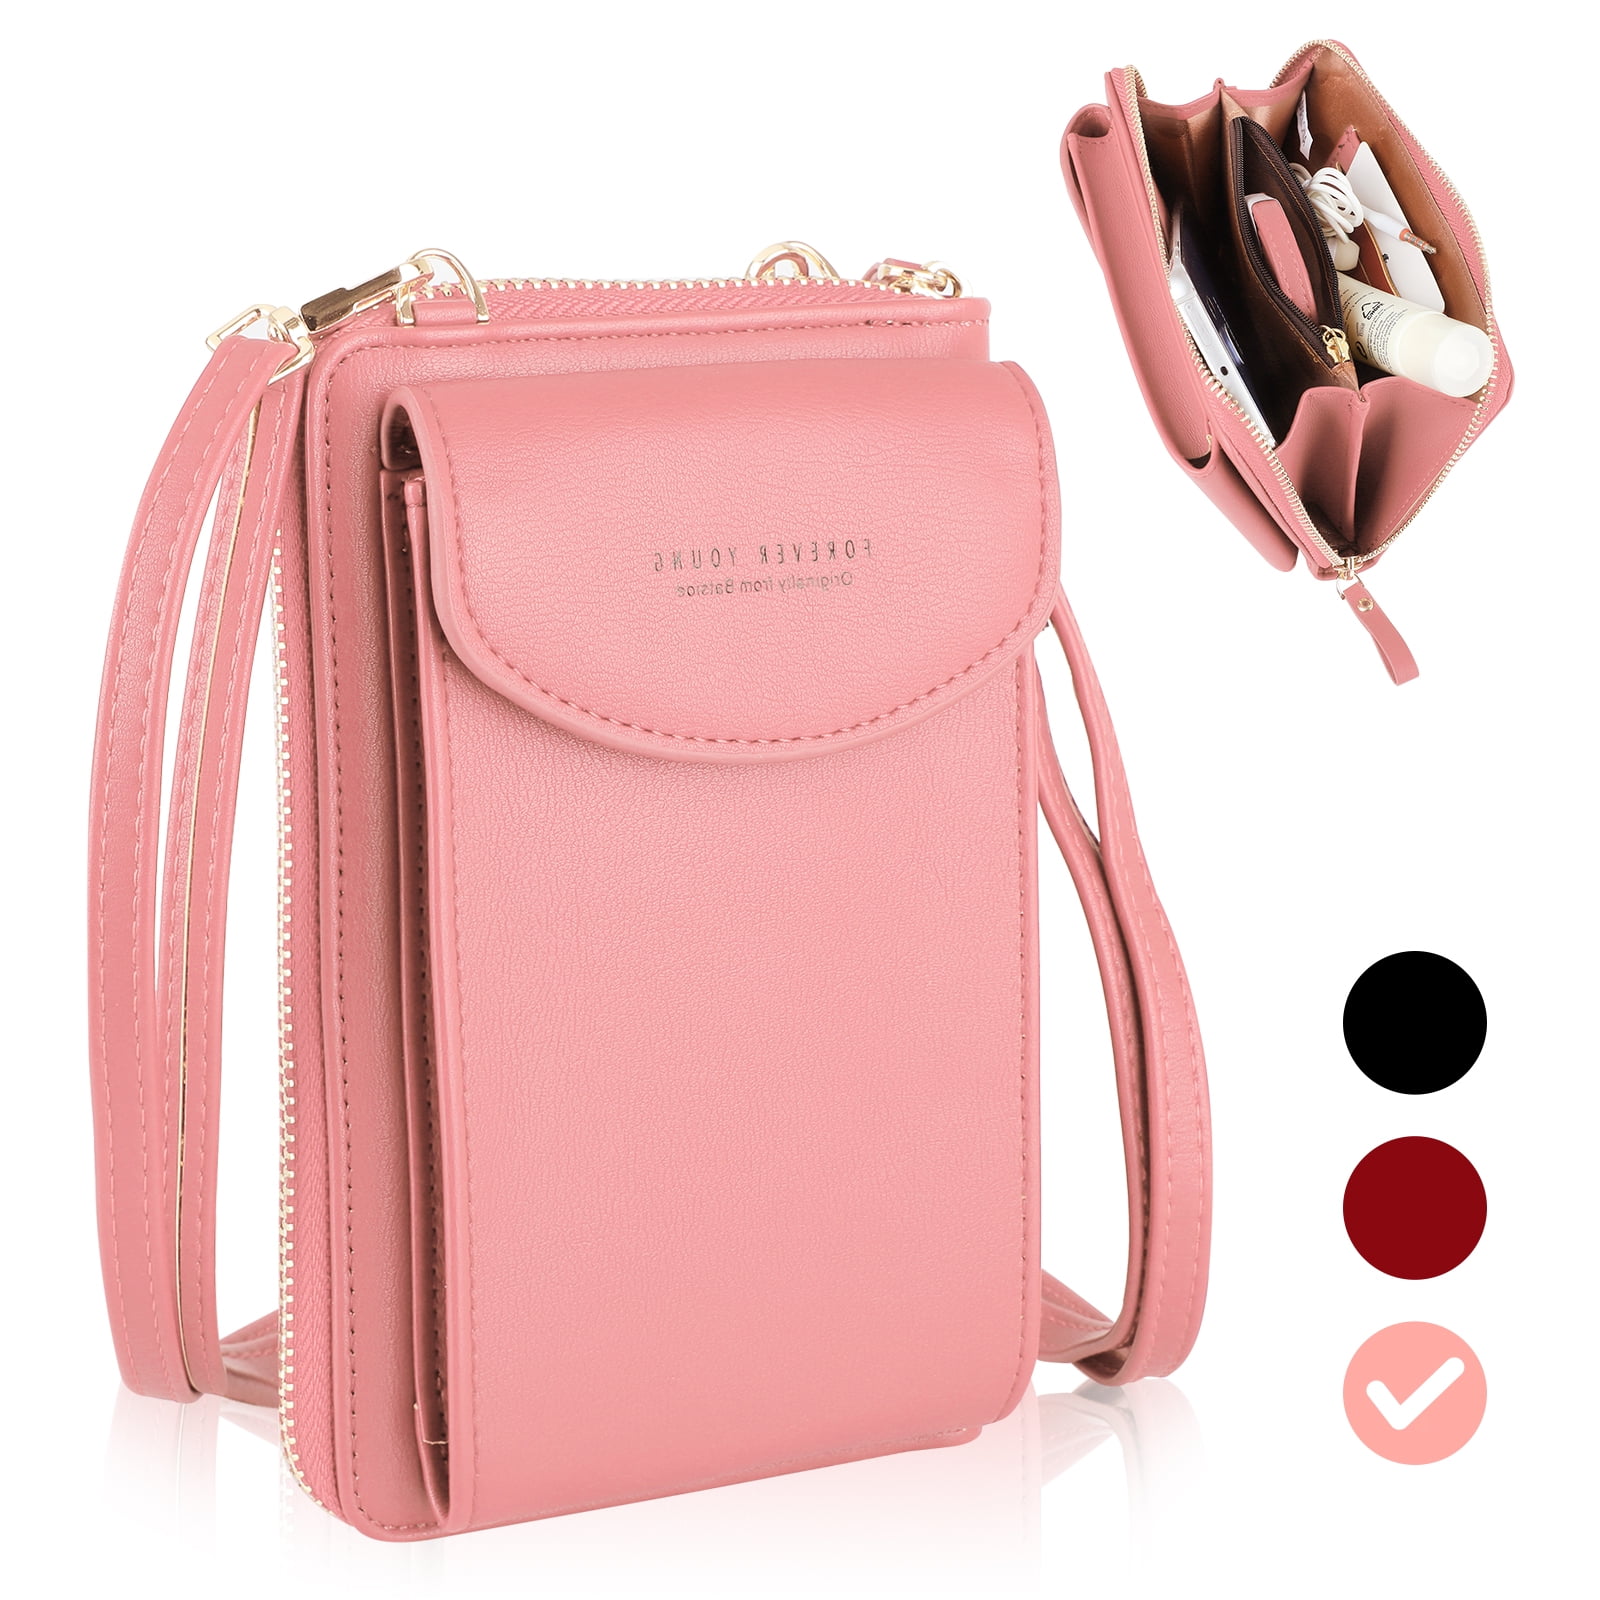 Woman Synthetic Leather Mini Messenger CrossBody Mobile phone holder Metal Chain